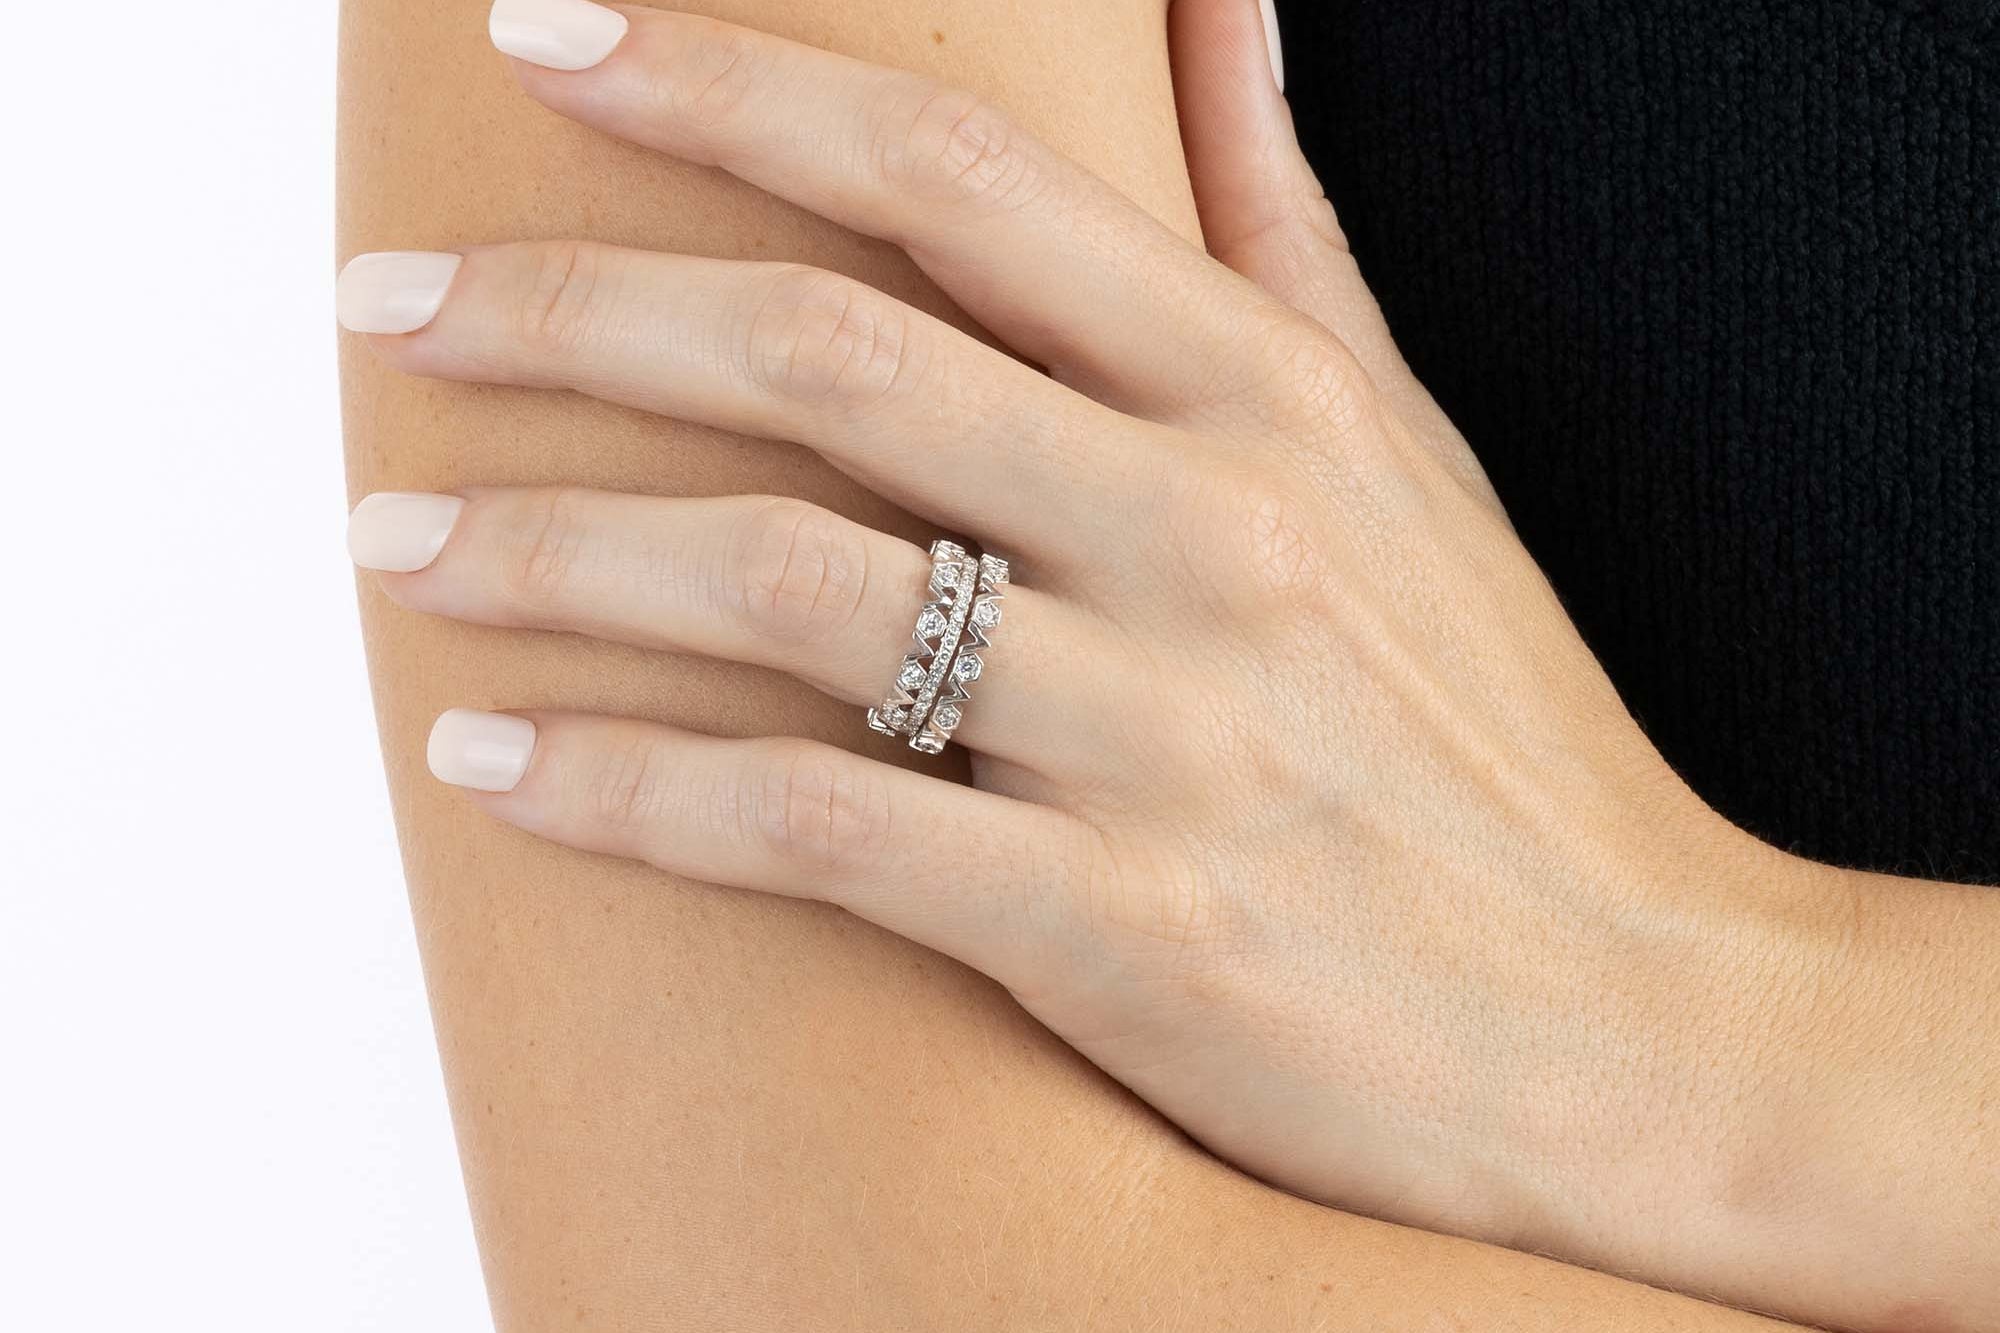 Stack of three White Gold and Diamond Rings with octagons and V shapes, Medium - Model shot